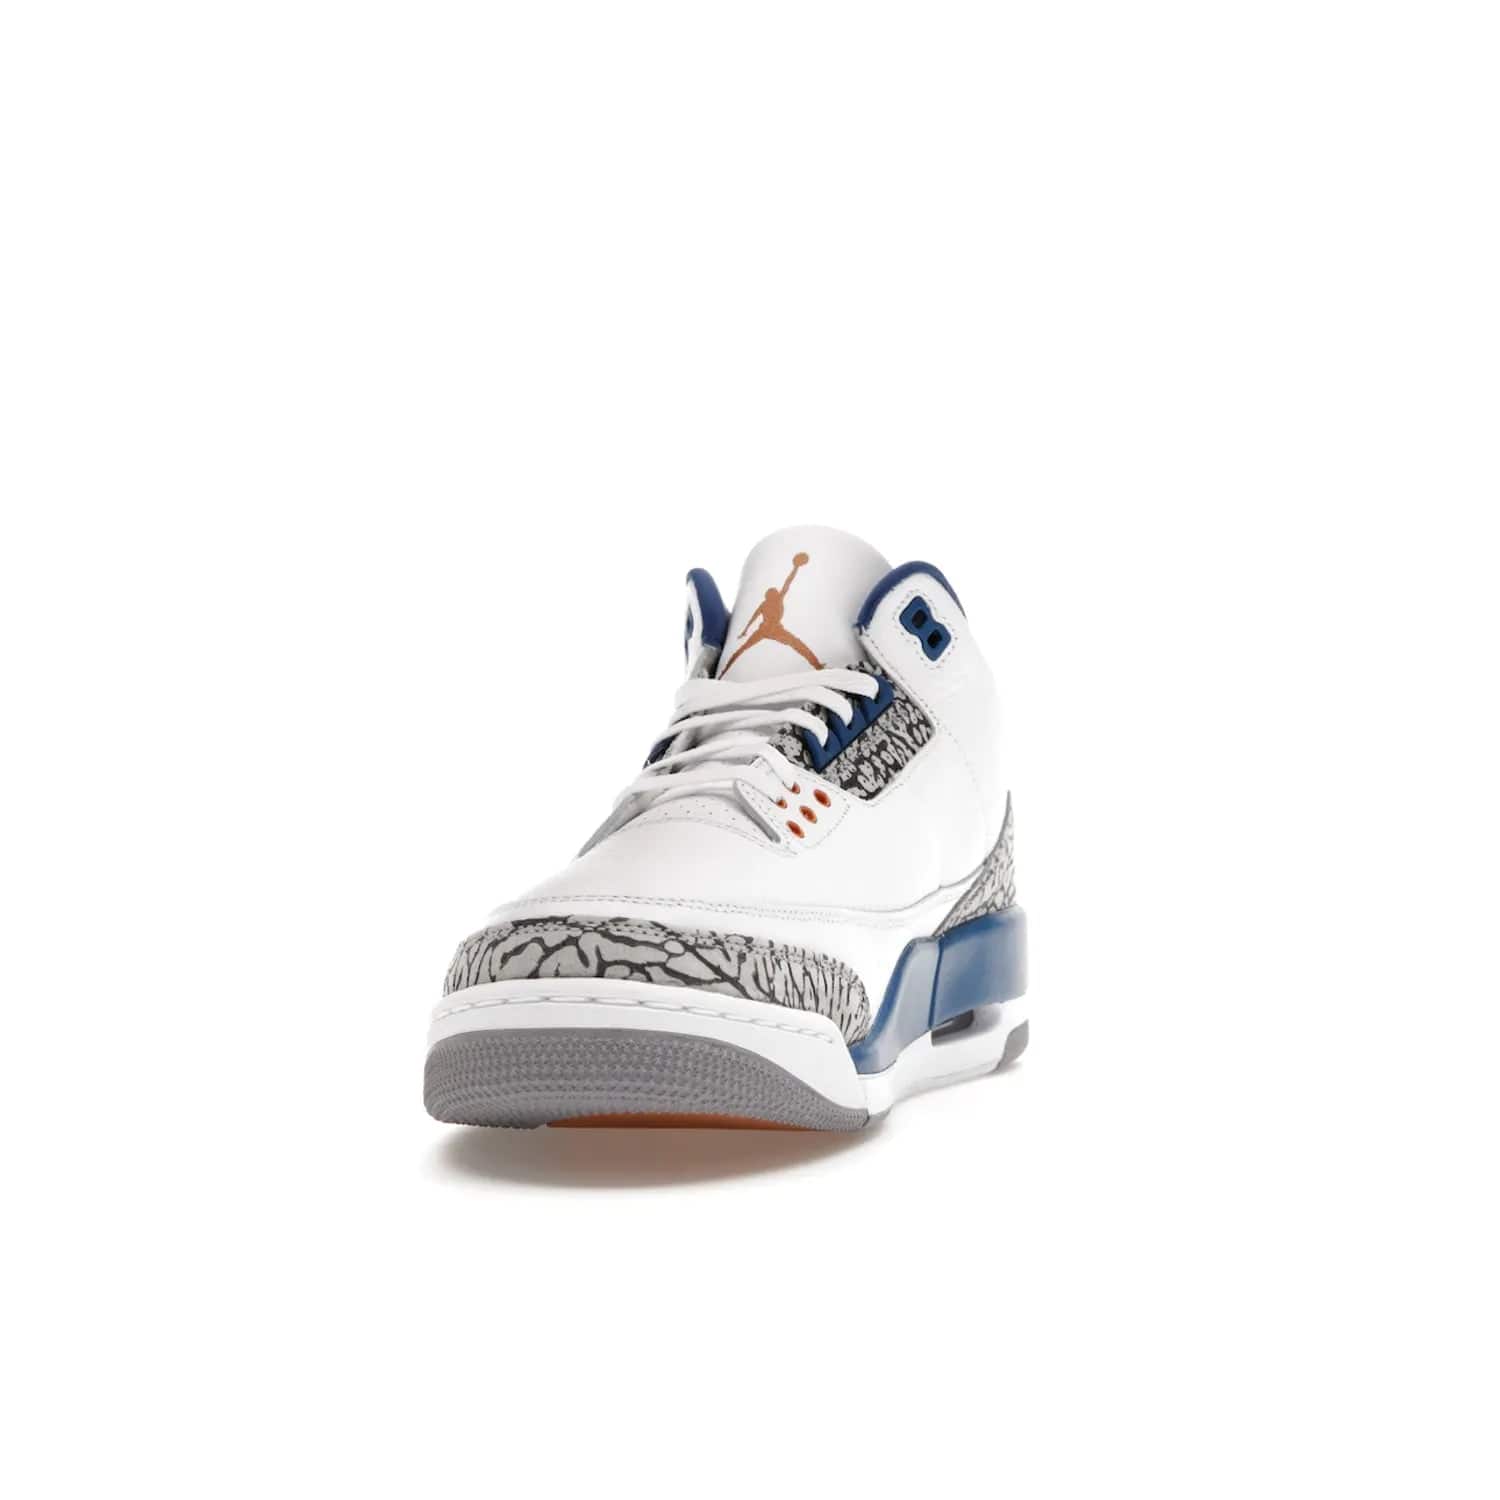 Jordan 3 Retro Wizards - Image 12 - Only at www.BallersClubKickz.com - ##
Special tribute sneaker from Jordan Brand to Michael Jordan's time with the Washington Wizards. Iconic white upper, orange Jumpman logo, blue accents, metallic copper details, and cement grey outsole. Buy the Air Jordan 3 Retro Wizards April 29, 2023.